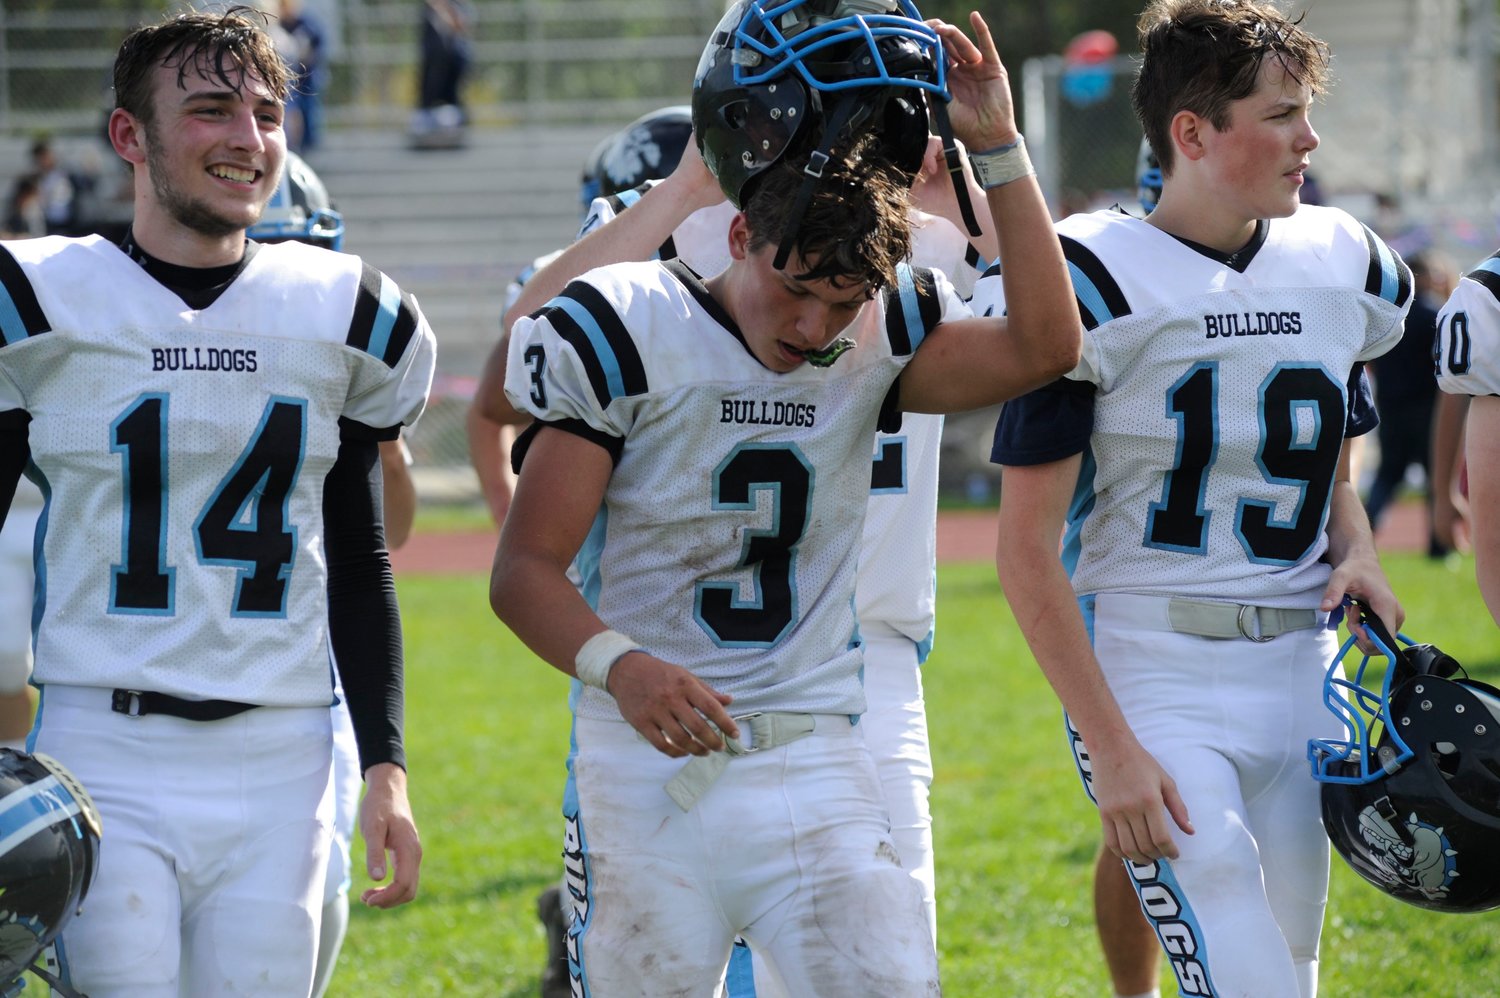 In happier times this year, Sullivan West defeated Tri-Valley 46-10 on September 25. Pictured are Mike Roth, Justin Grund and Liam Cavanaugh.